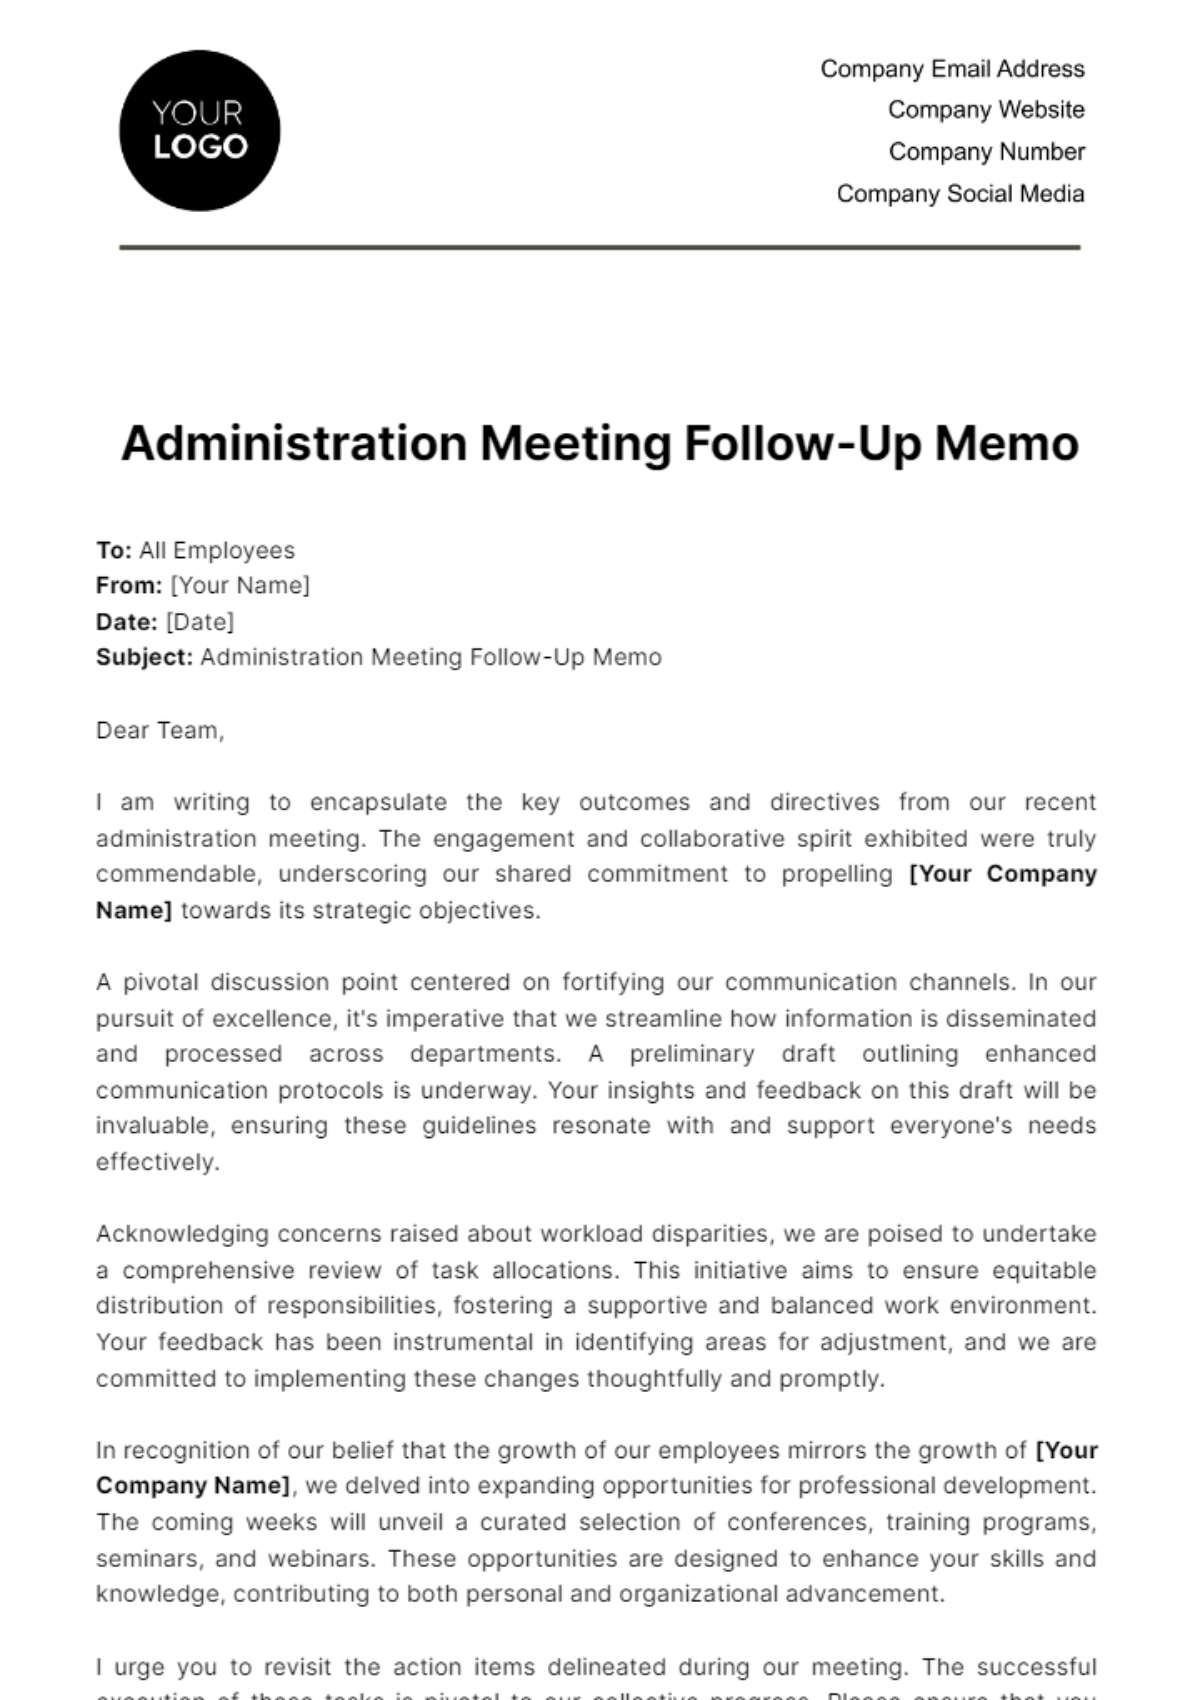 Free Administration Meeting Follow-Up Memo Template